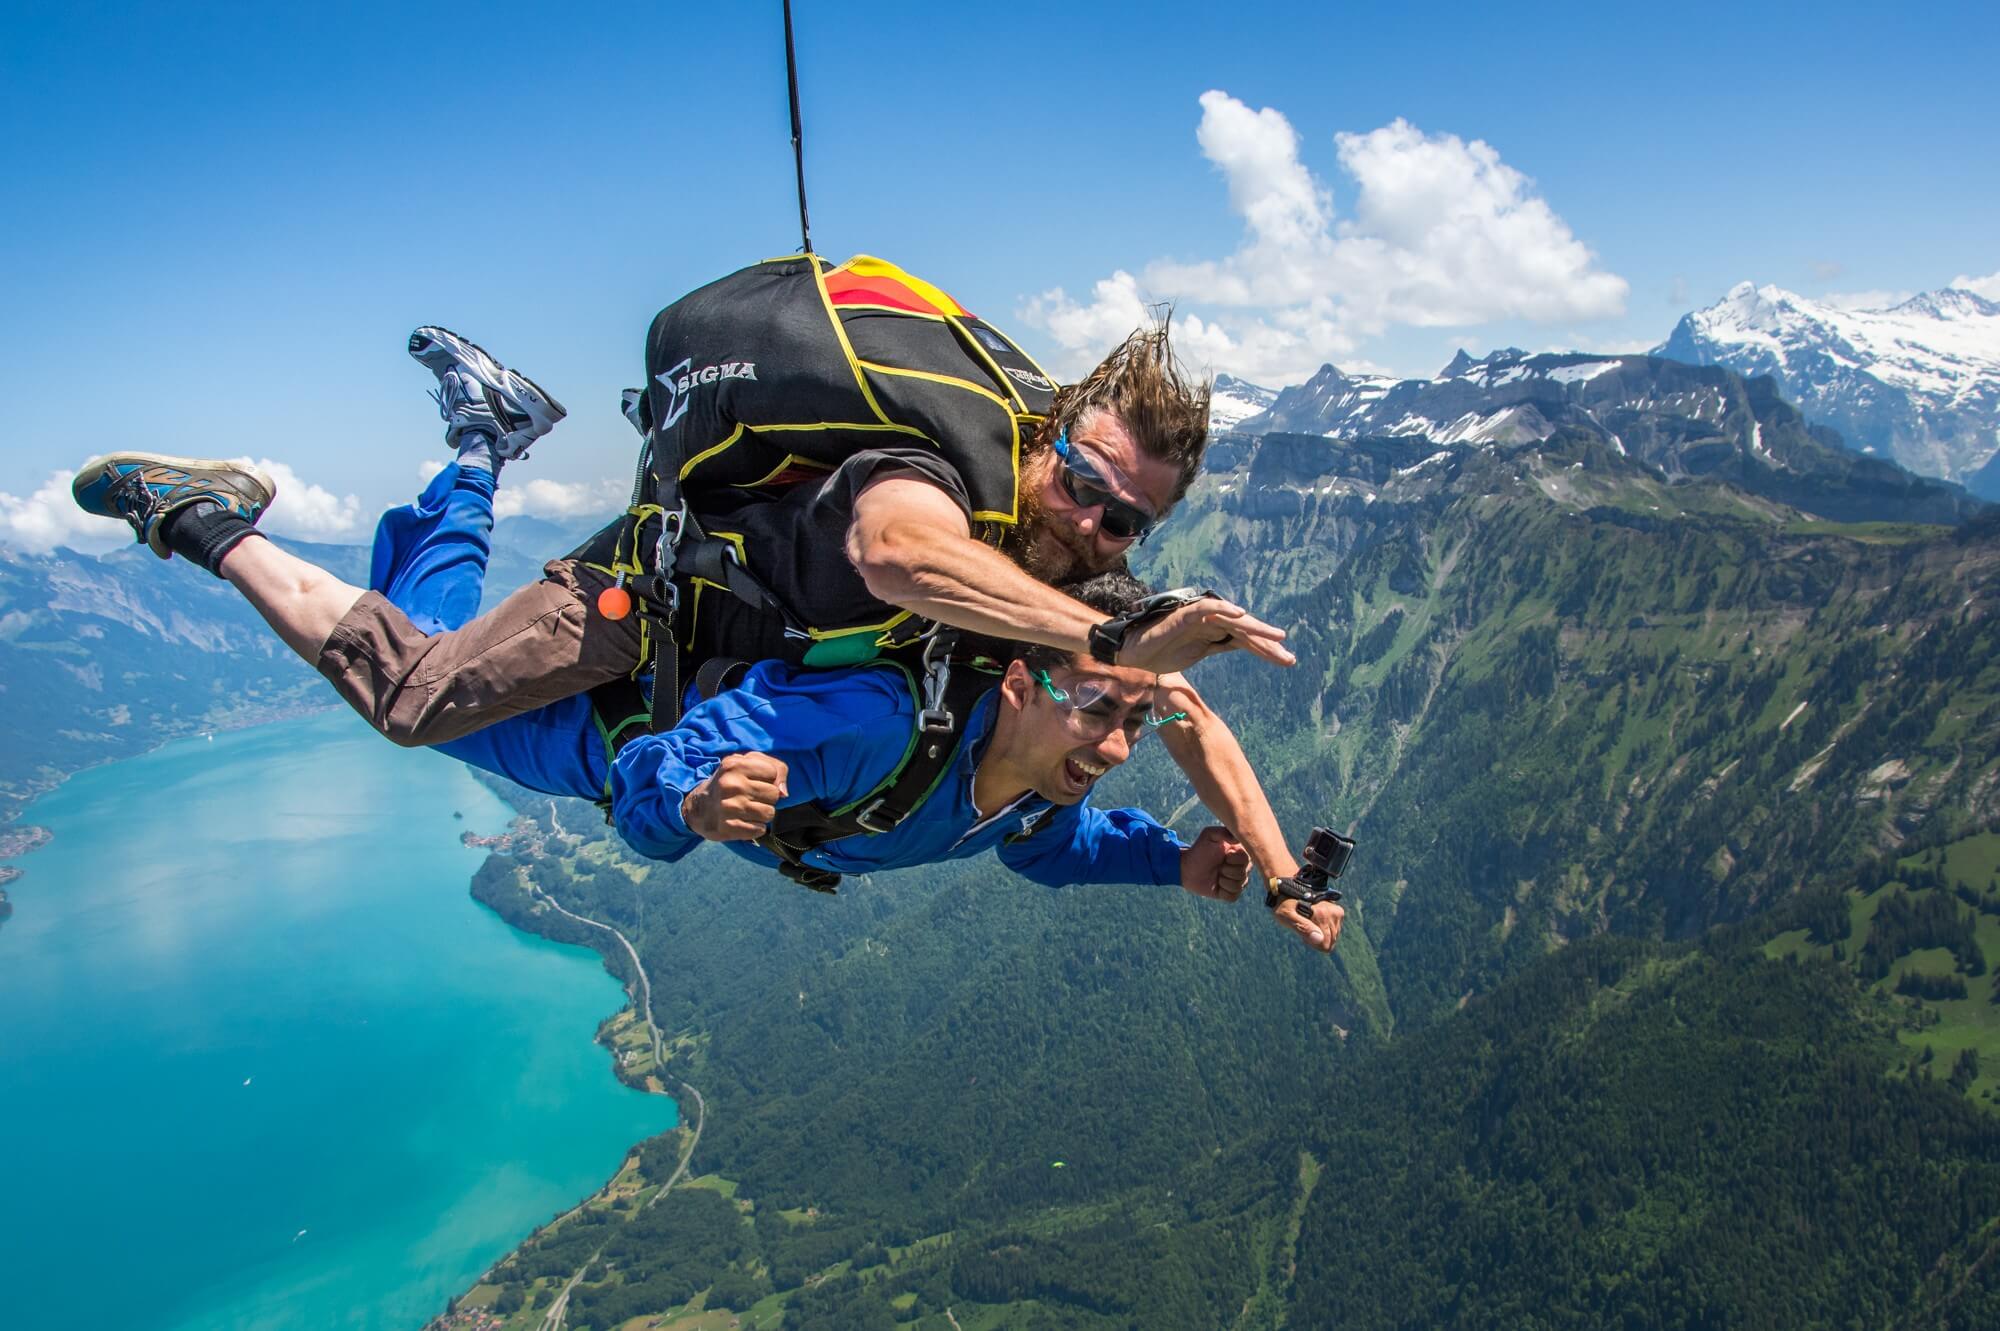 Free fall with Skydive Interlaken